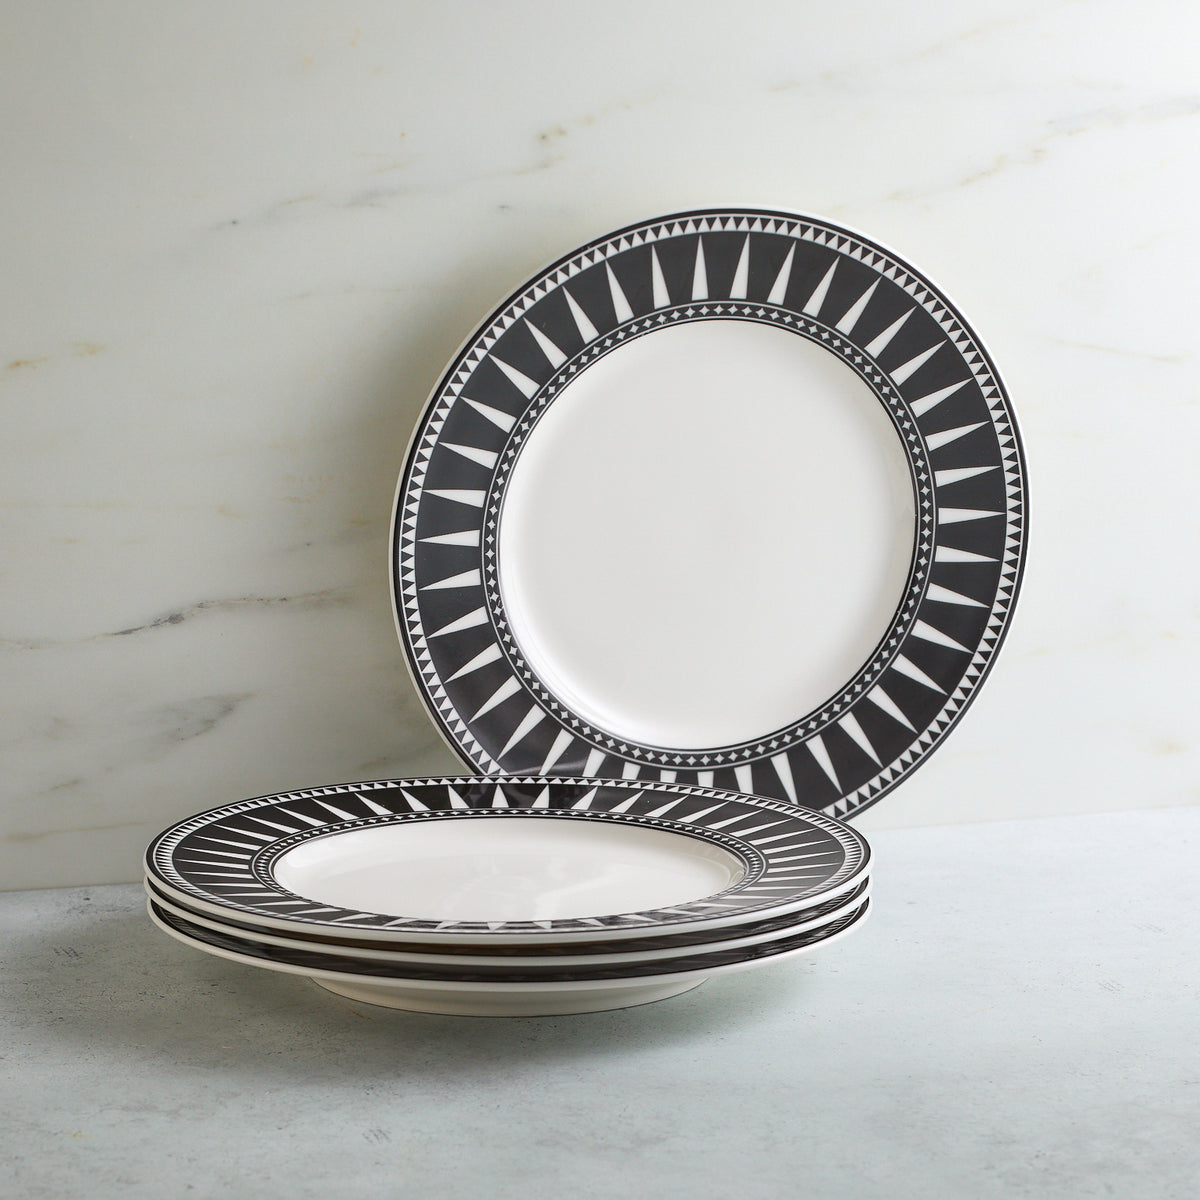 A stack of four Marrakech Rimmed Salad Plates from Caskata Artisanal Home with black and white geometric patterns along the edges, placed on a light gray surface against a white marble background.